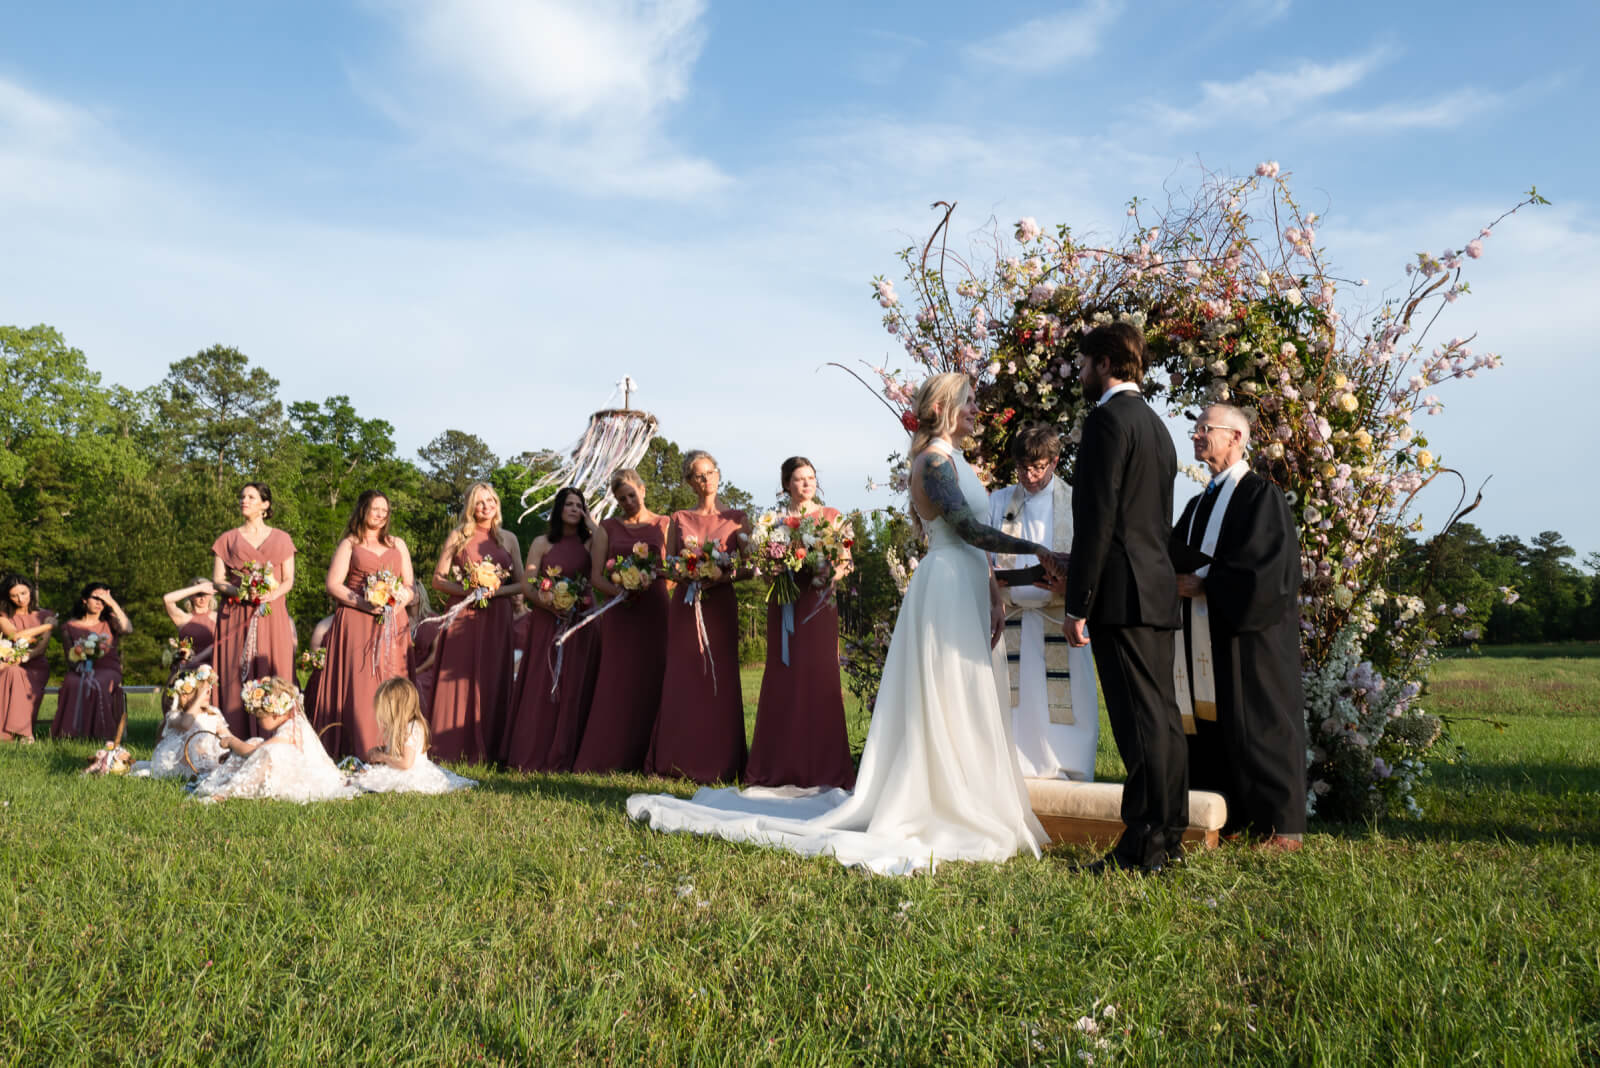 This Farm Wedding Had THE Most Fabulous Flowers